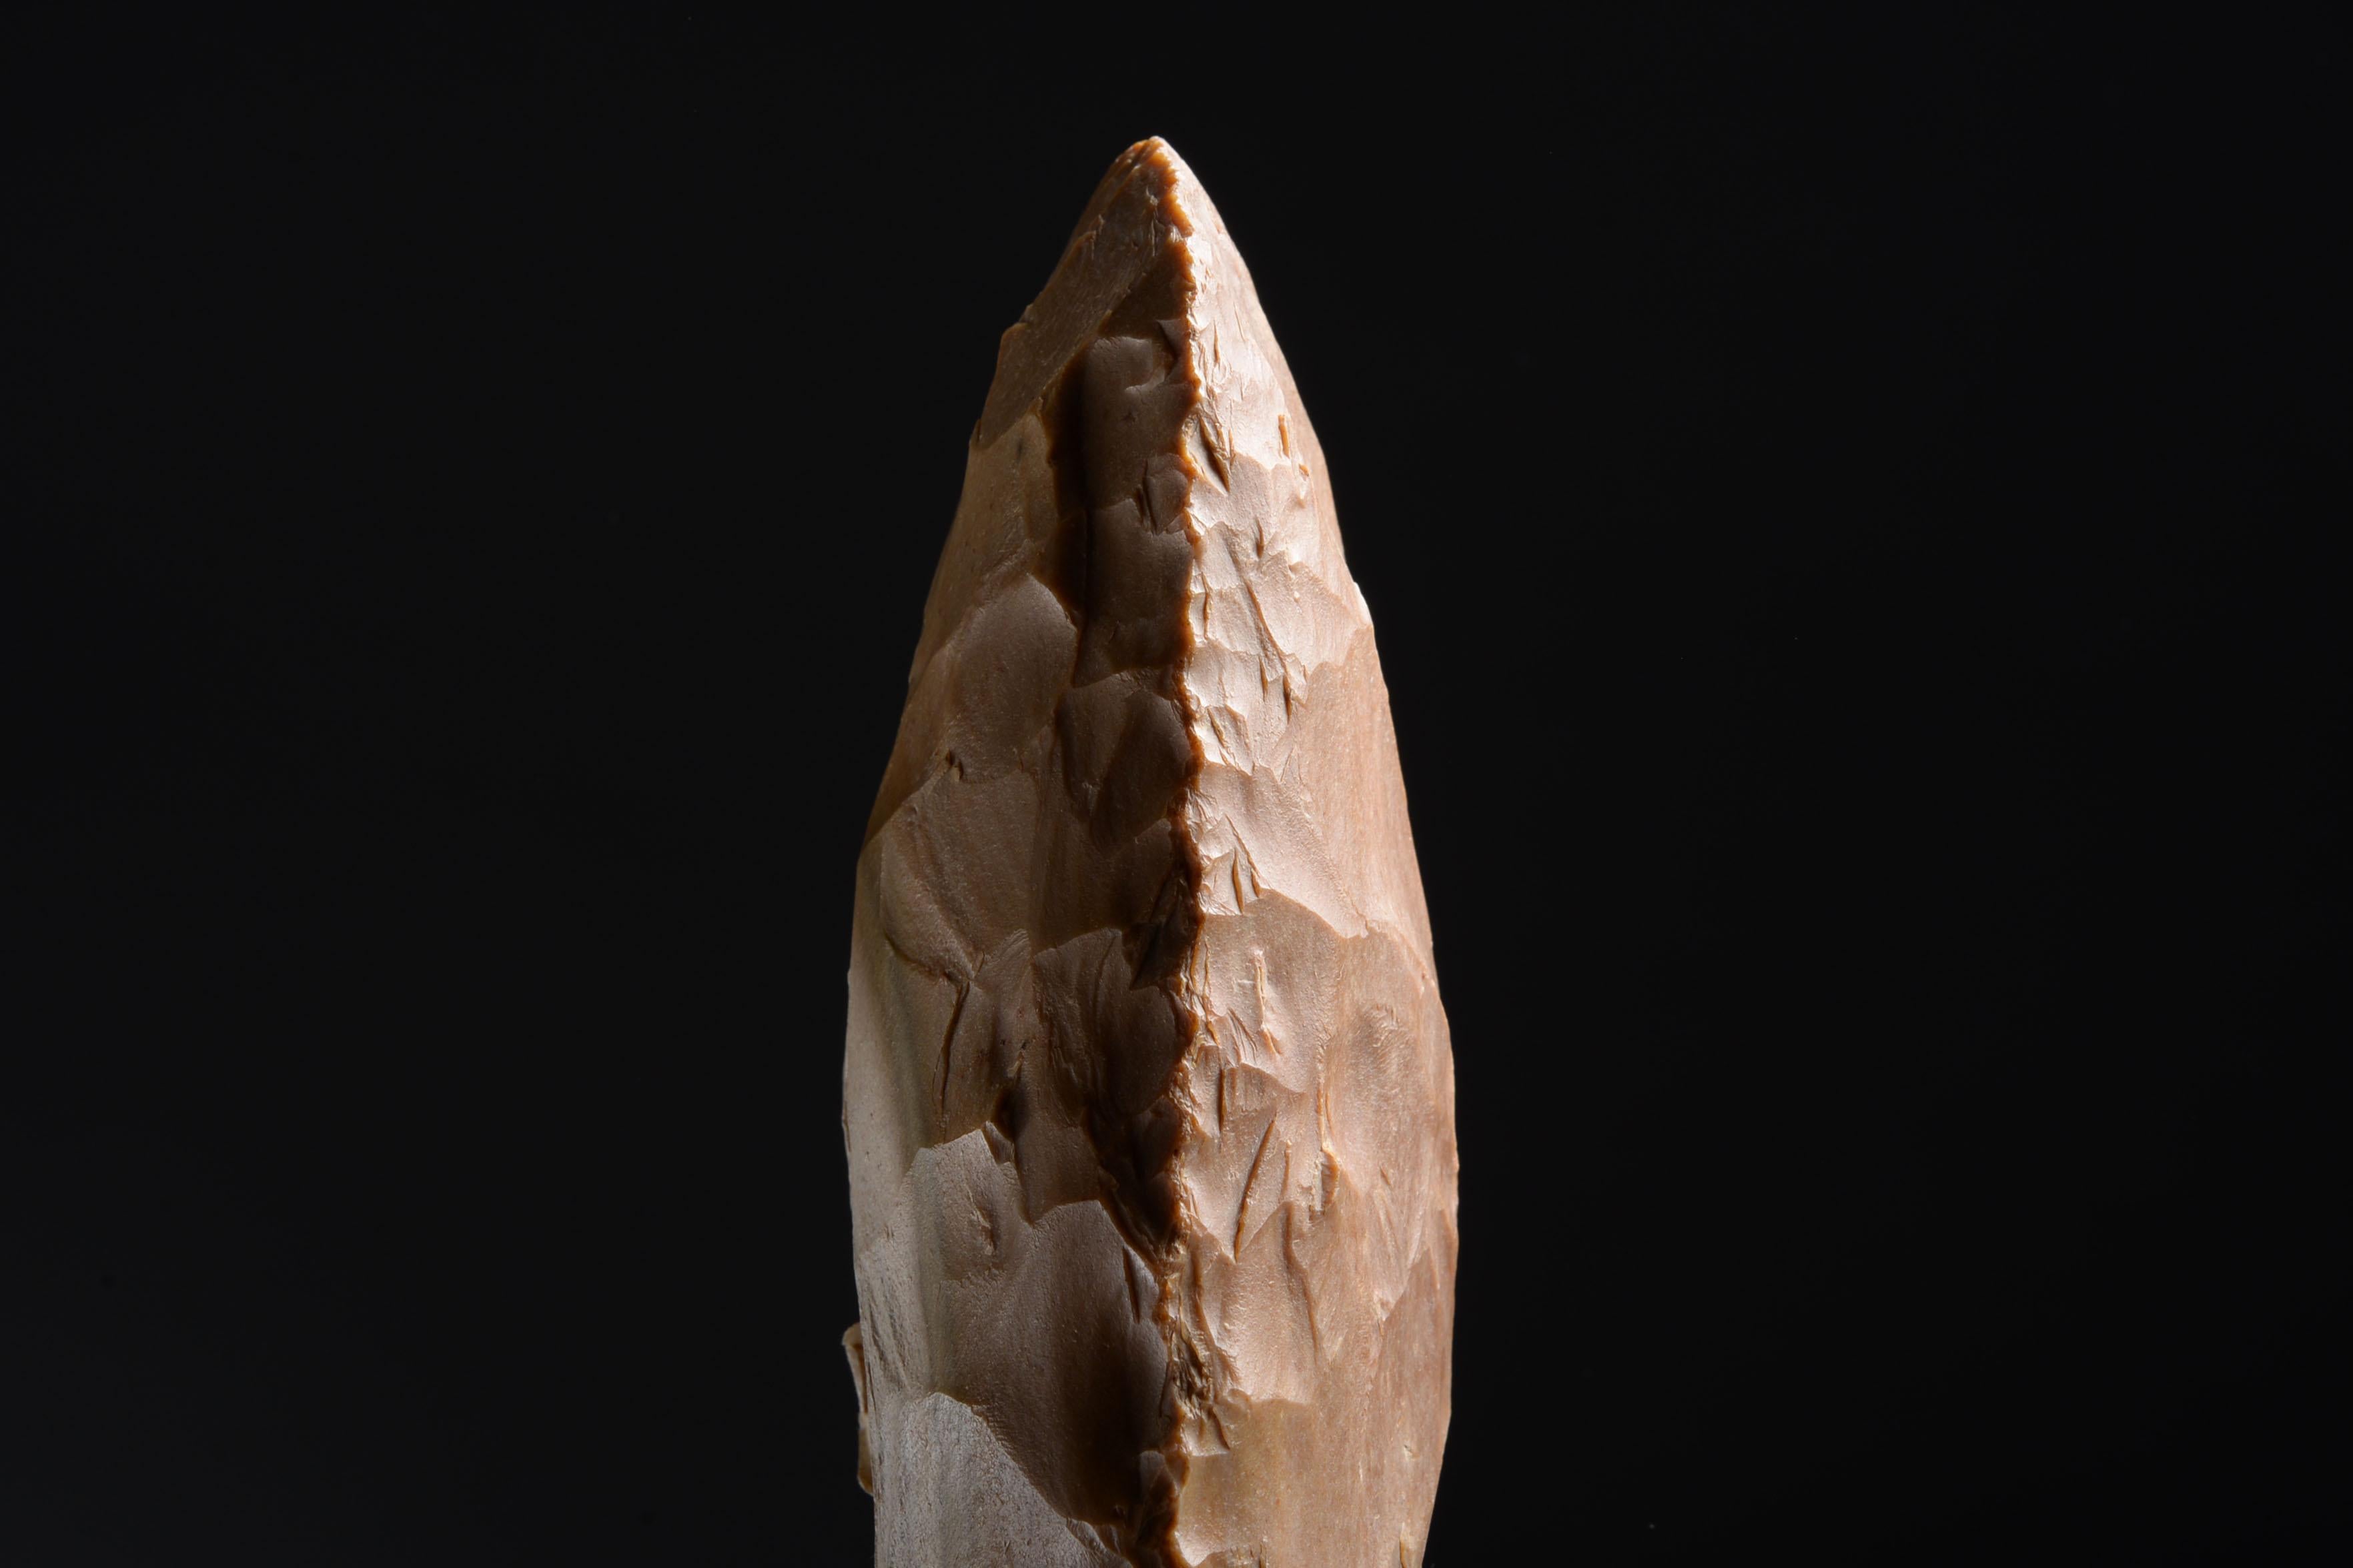 A large, thin-butted Neolithic flint axe found in Mauprévoir, France. Knapped from pink-brown flint, with a white grey streak on one side and with beautiful marks resembling stitching along the edges.

This elegant handaxe was made during the period